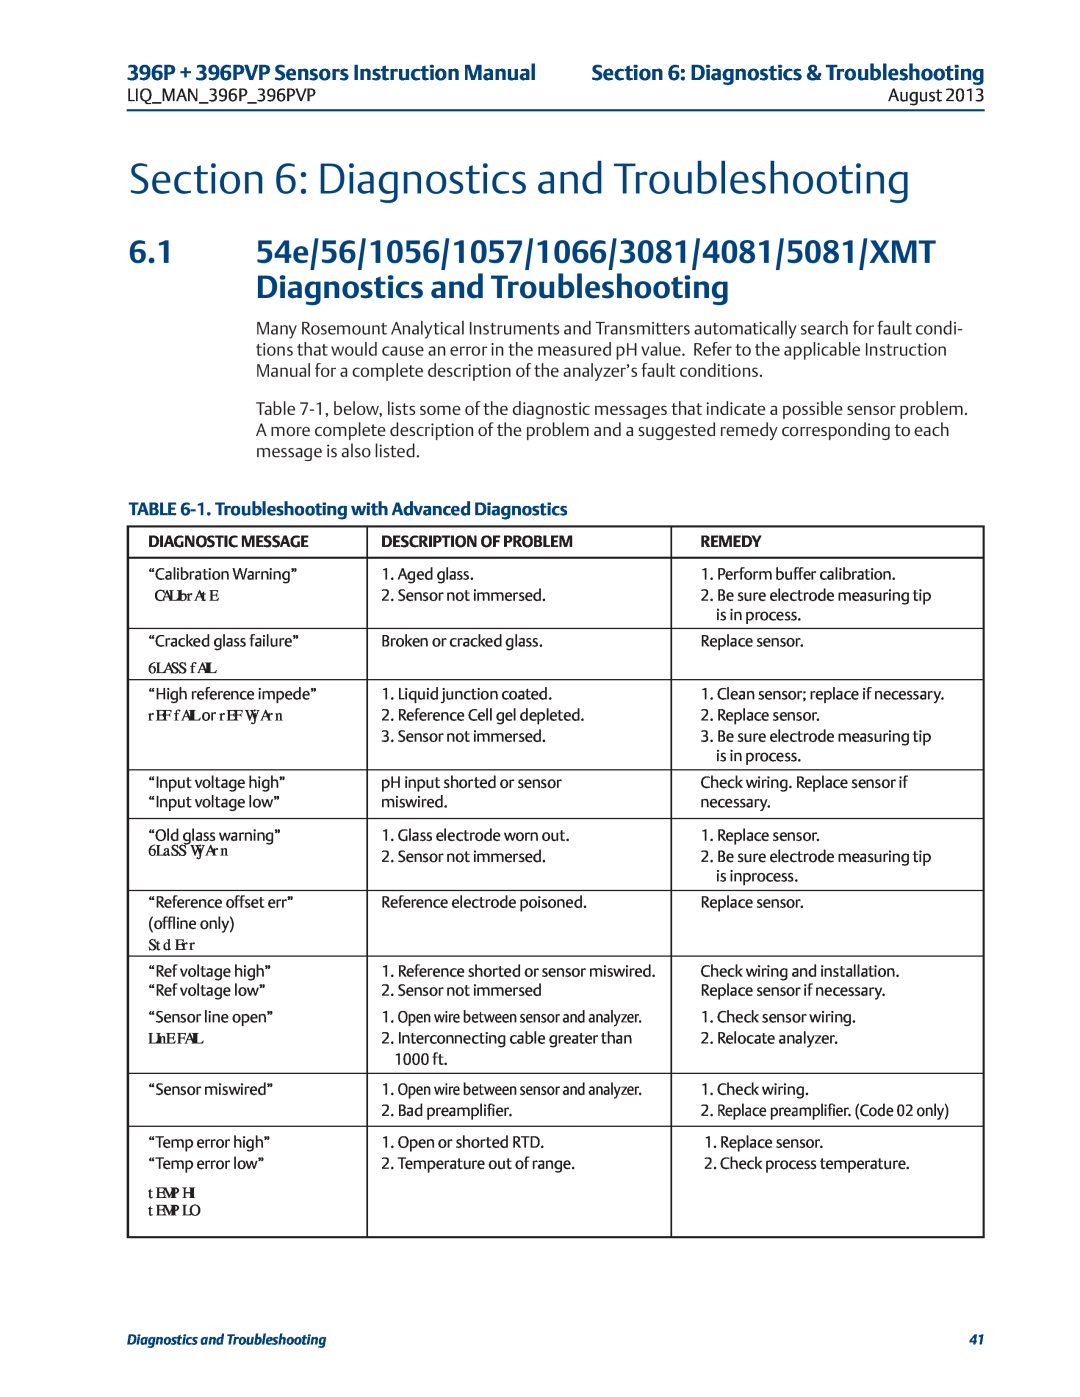 Emerson Diagnostics and Troubleshooting, Diagnostics & Troubleshooting, 396P + 396PVP Sensors Instruction Manual 